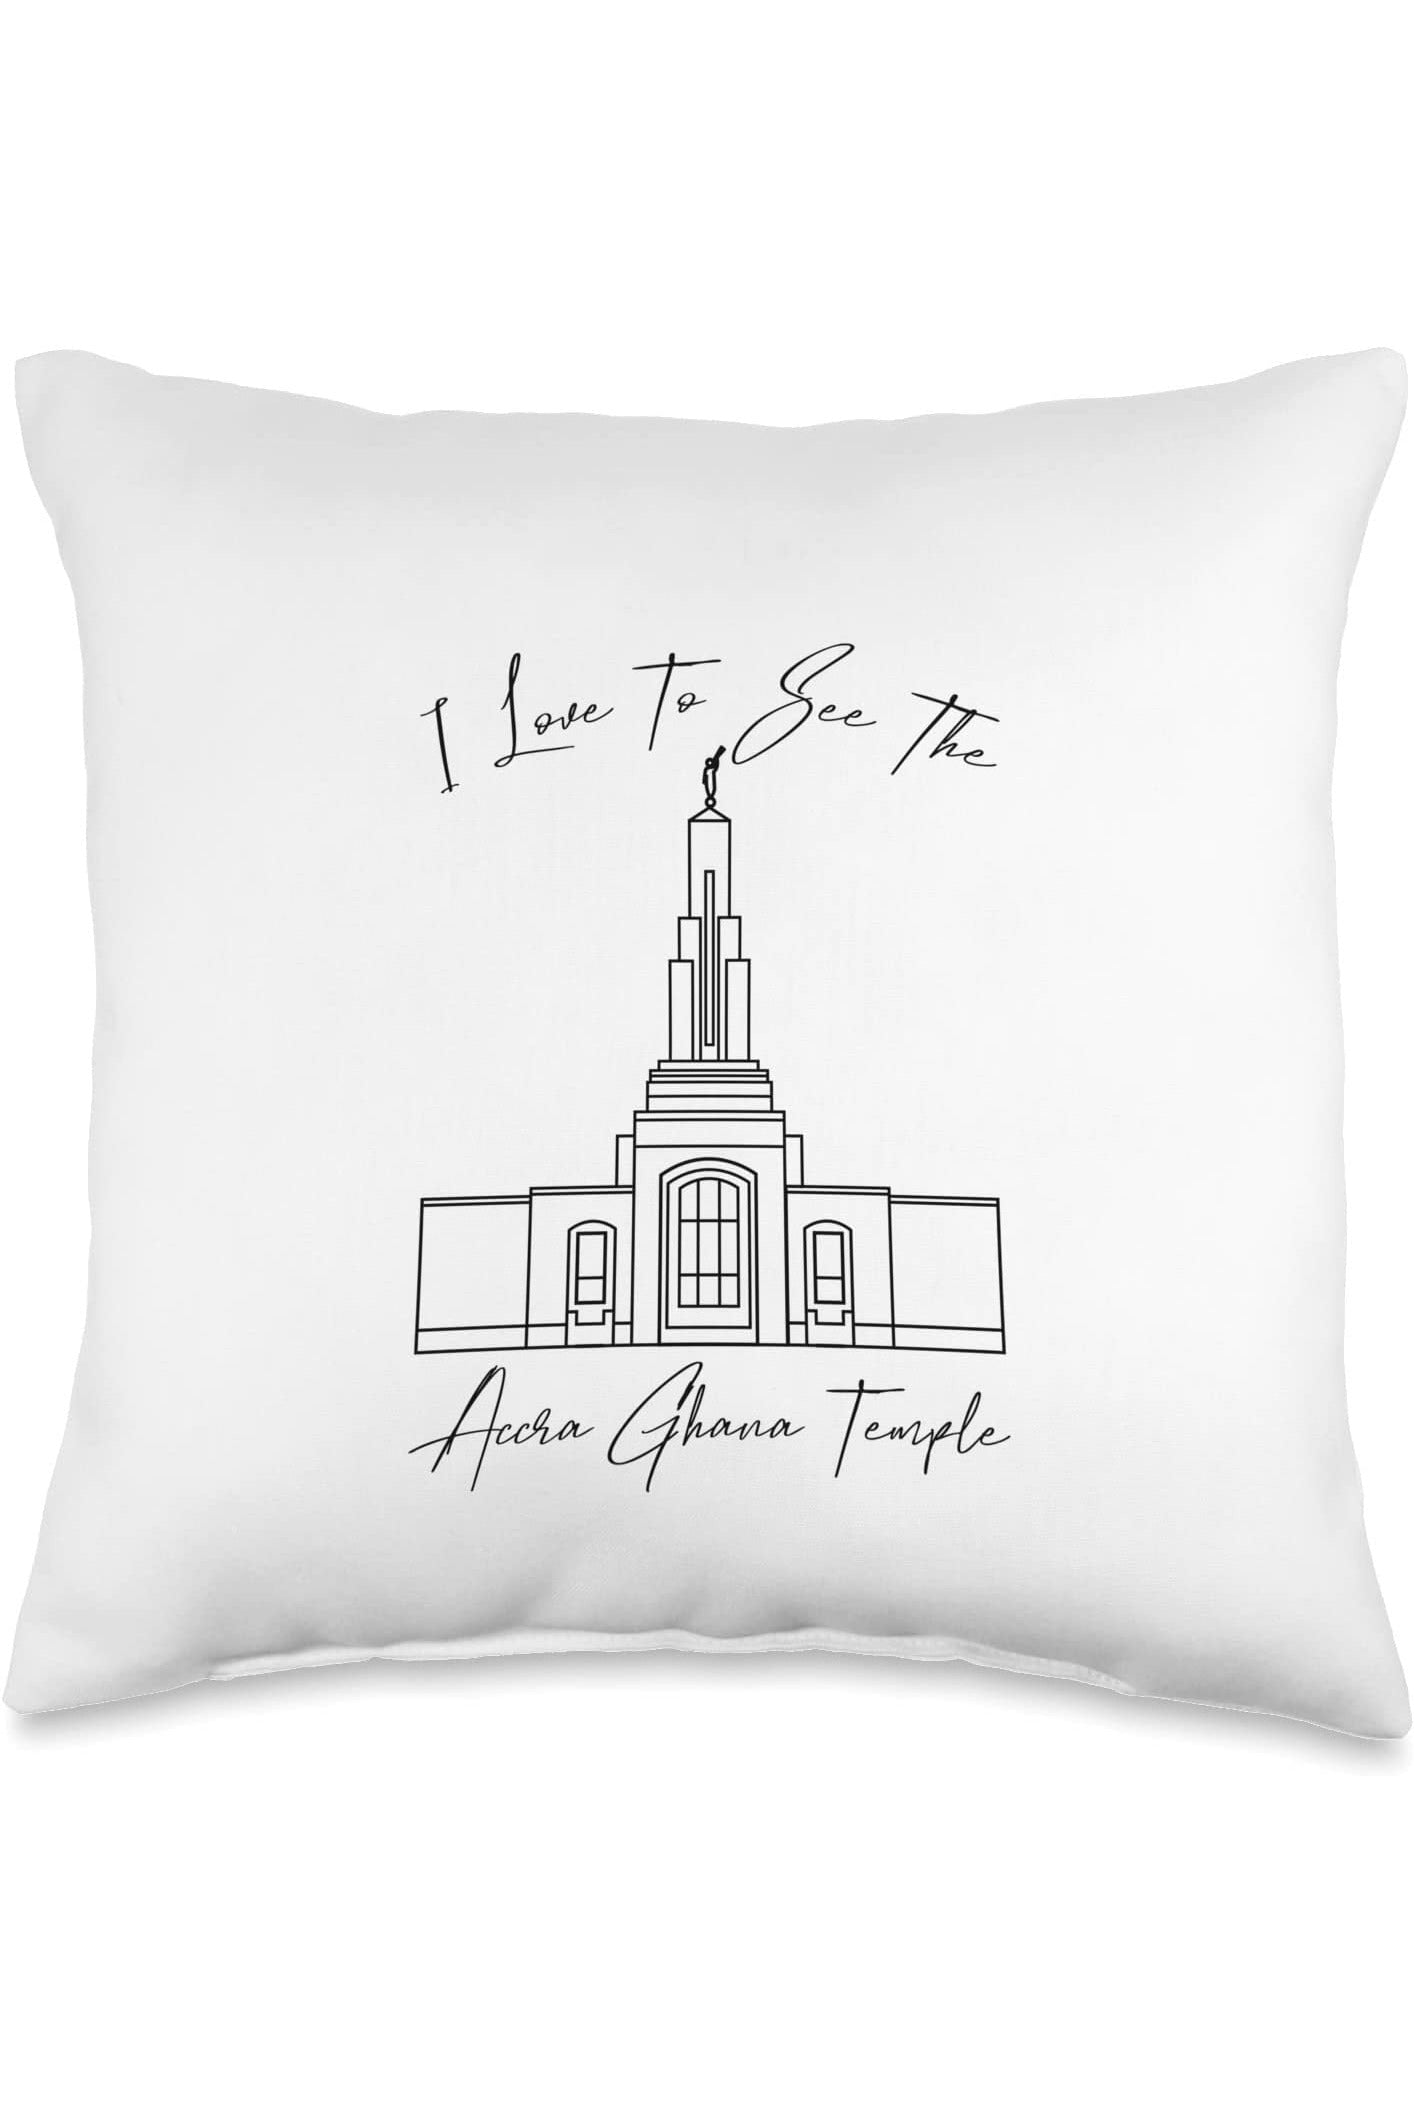 Accra Ghana Temple Throw Pillows - Calligraphy Style (English) US